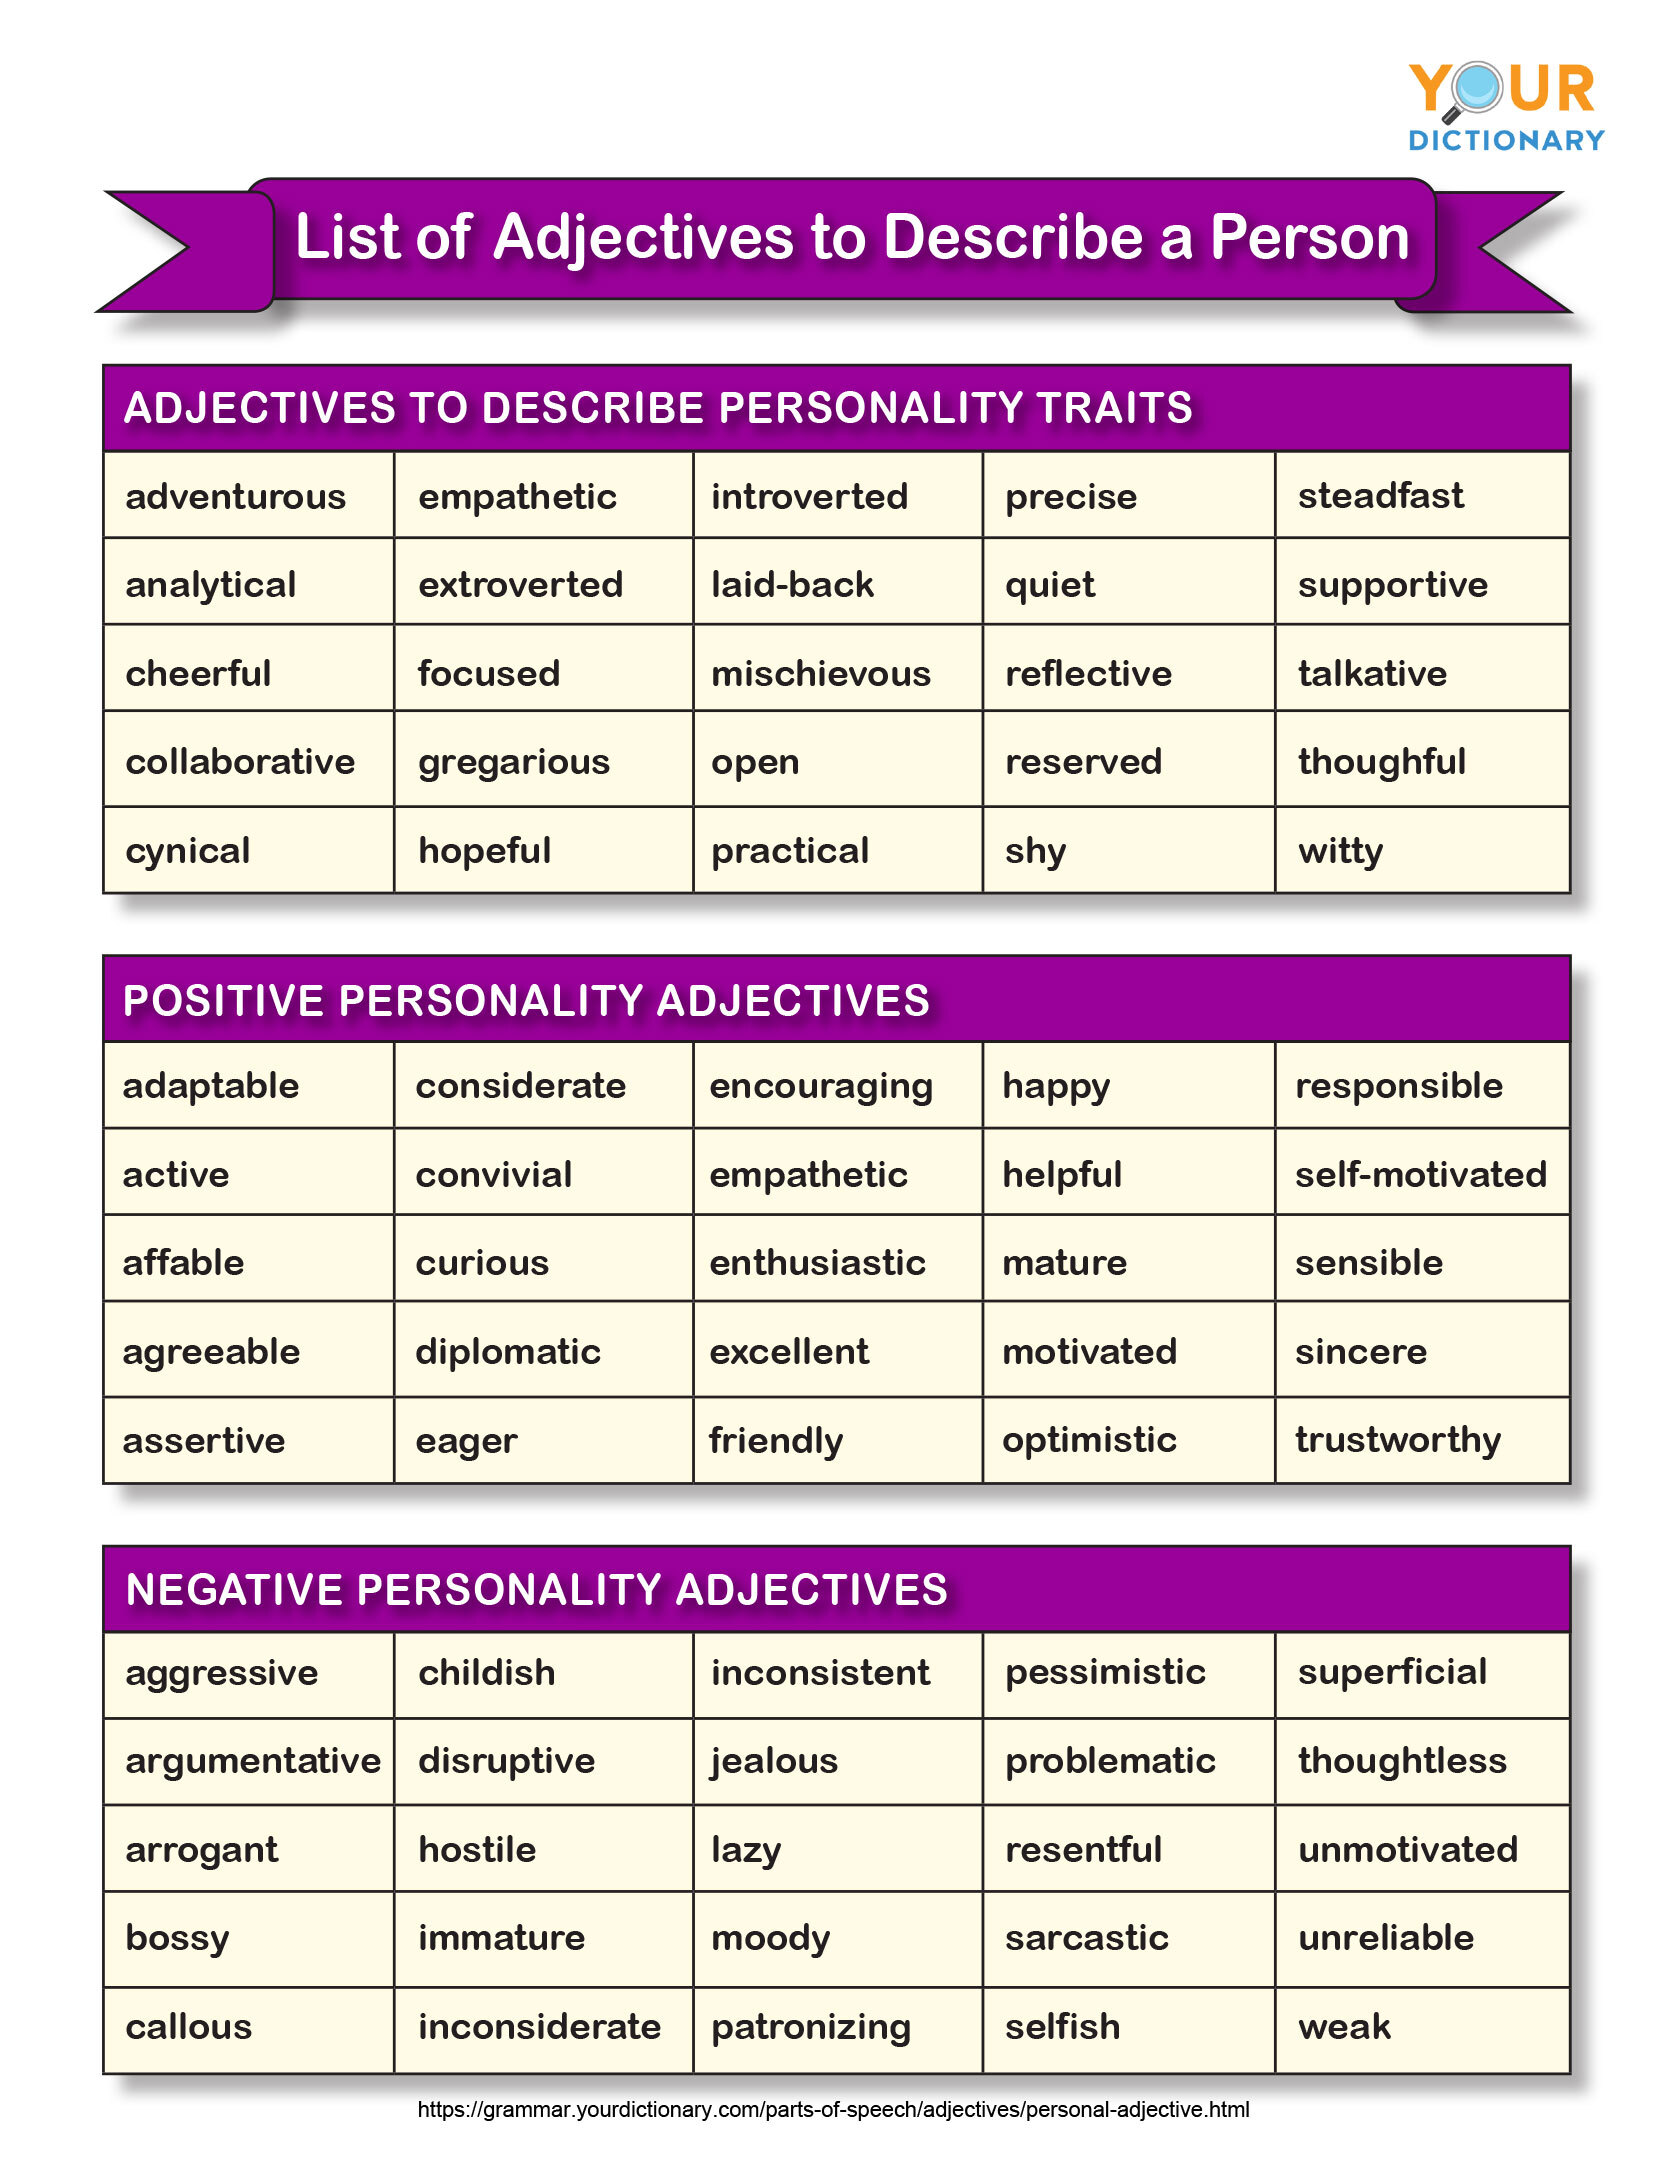 List of adjectives describe personality